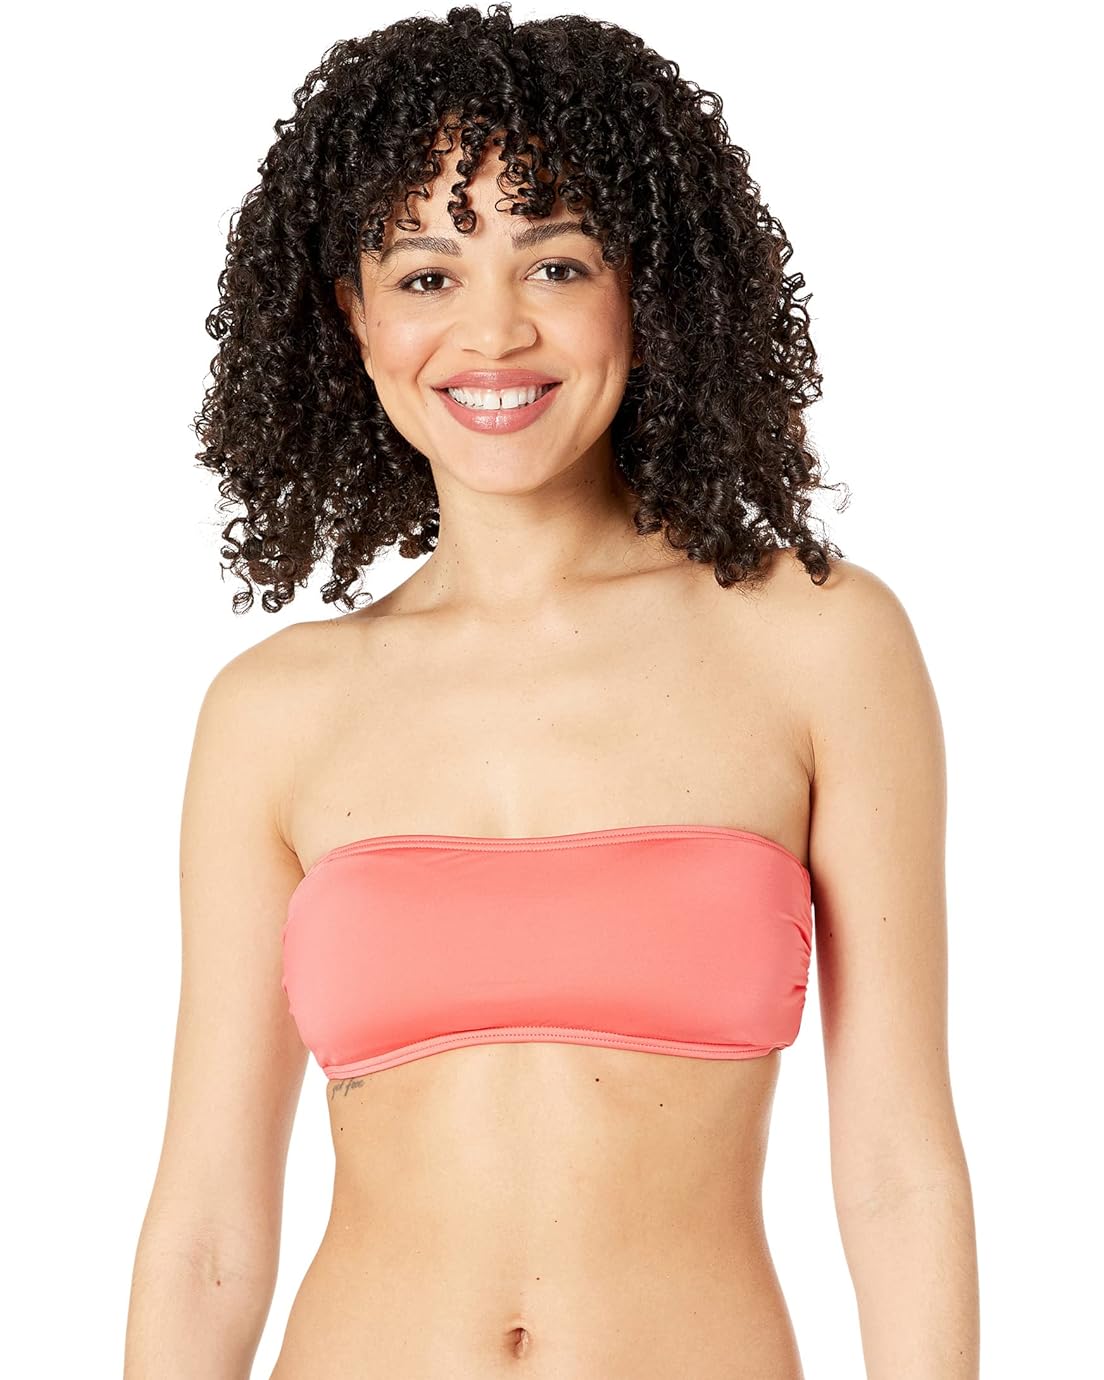 Kate Spade New York Heart Buckle Bandeau Bikini Top with Removable Soft Cups and Strap